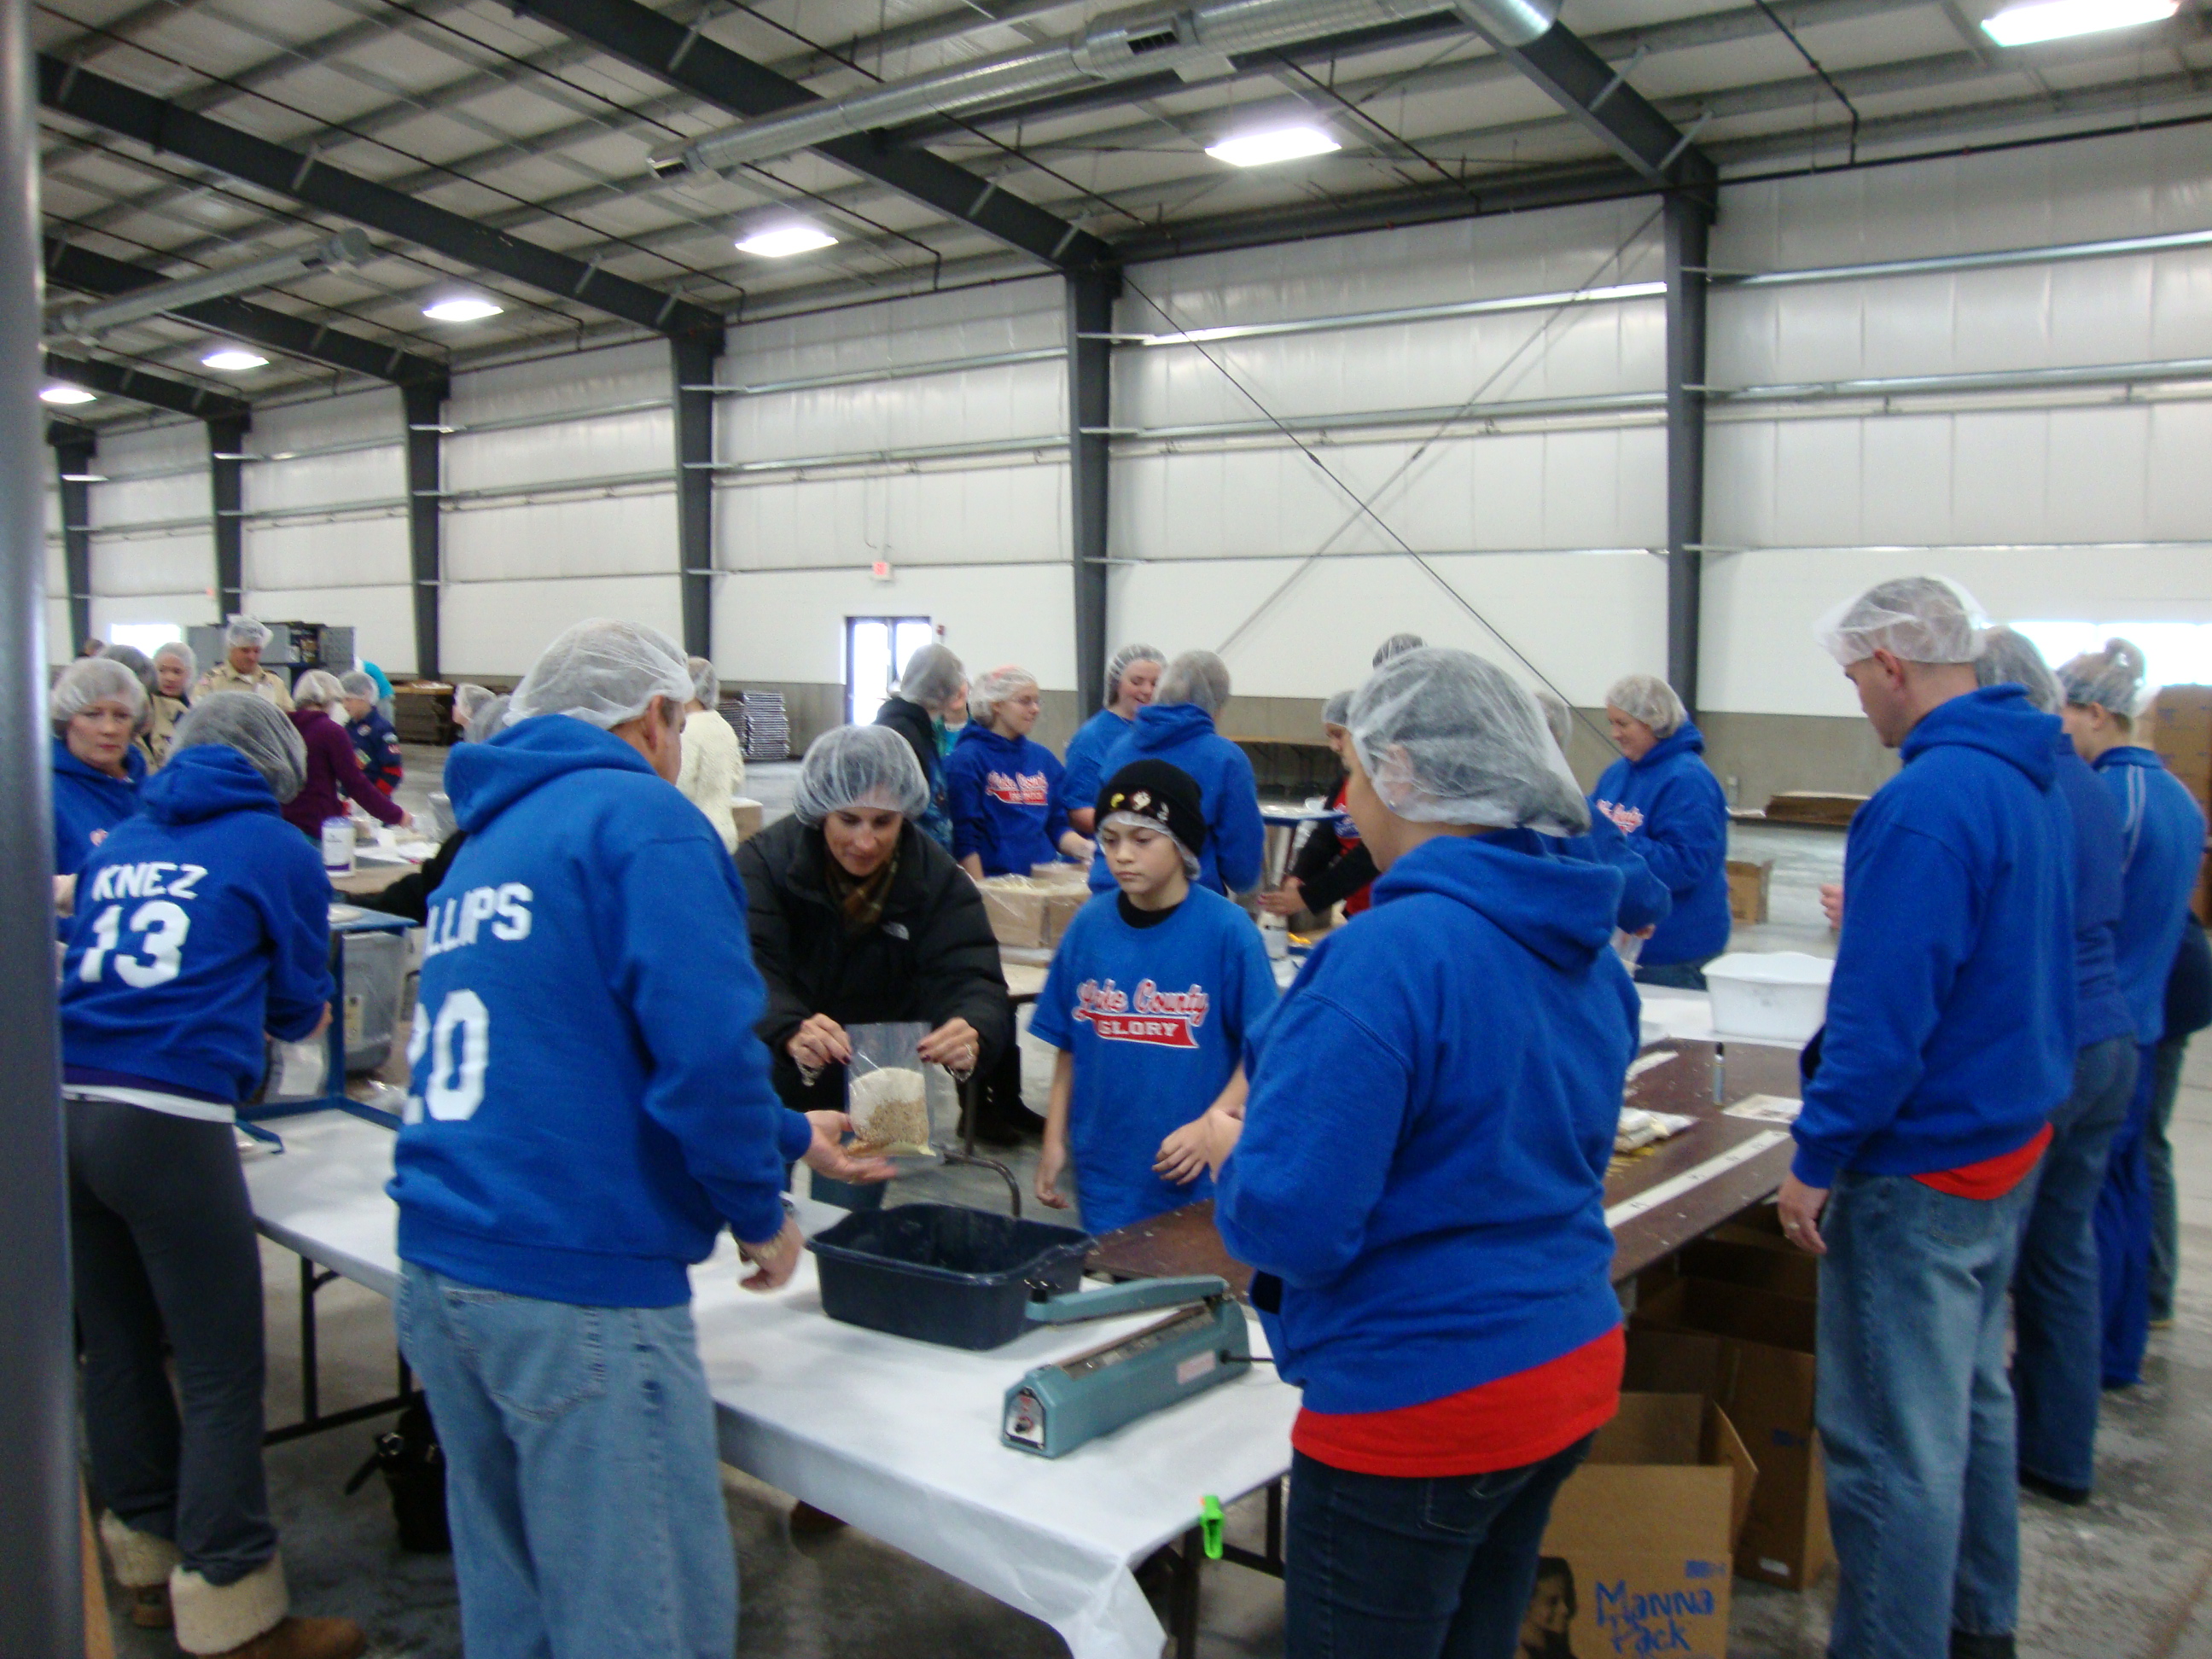 Glory at Feed My Starving Children 